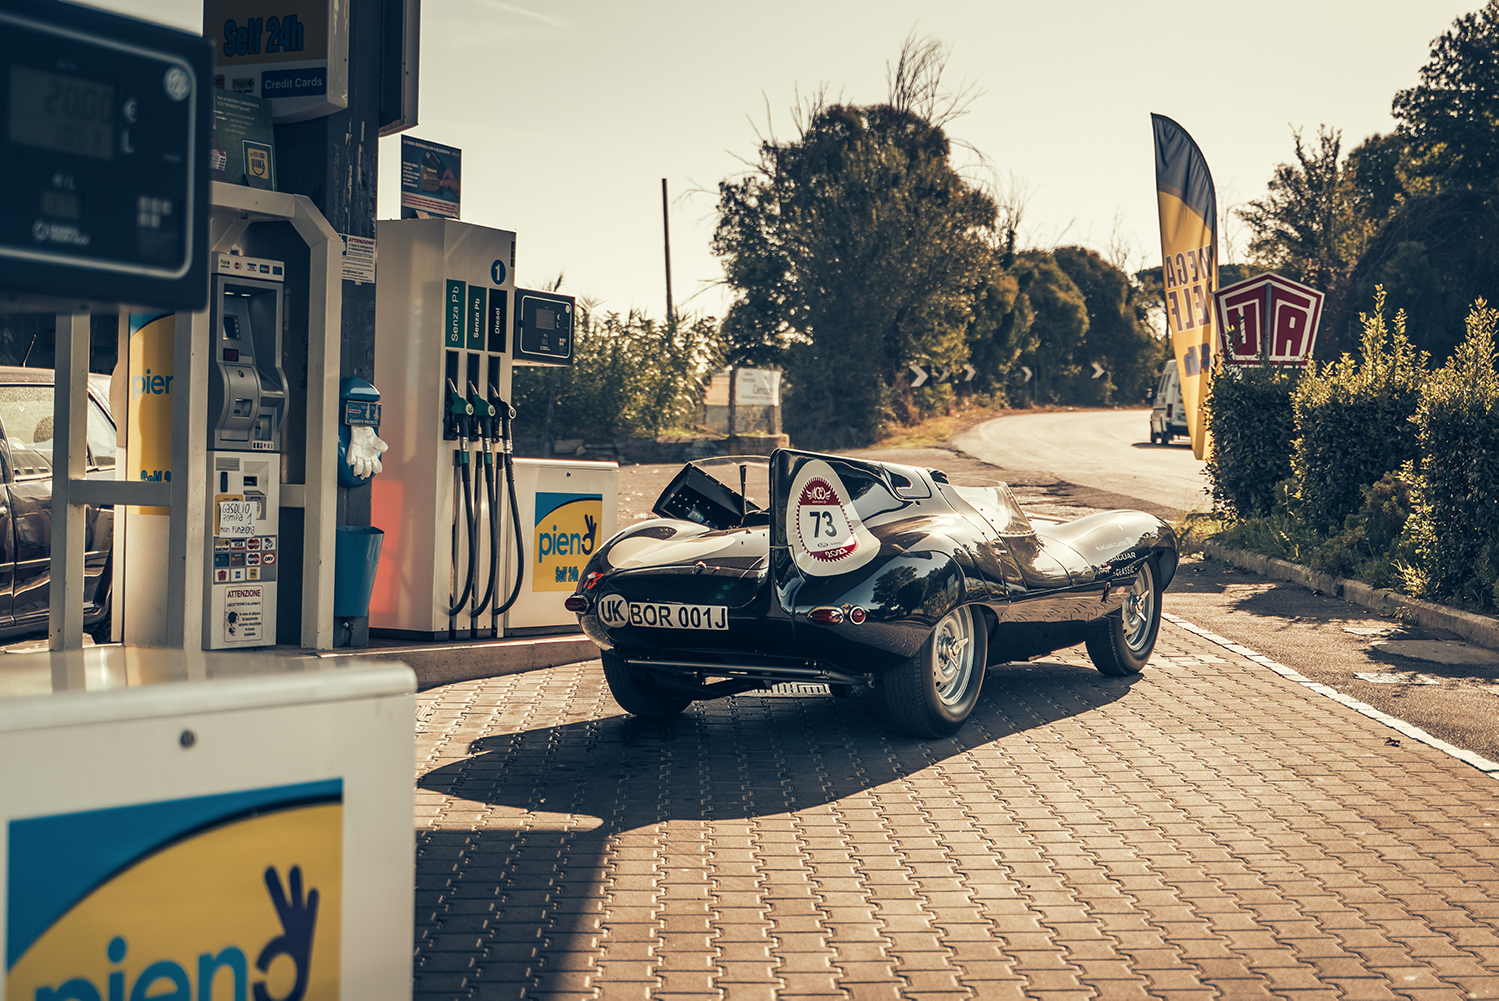 Filling up a Jaguar D-type Continuation at a gas station